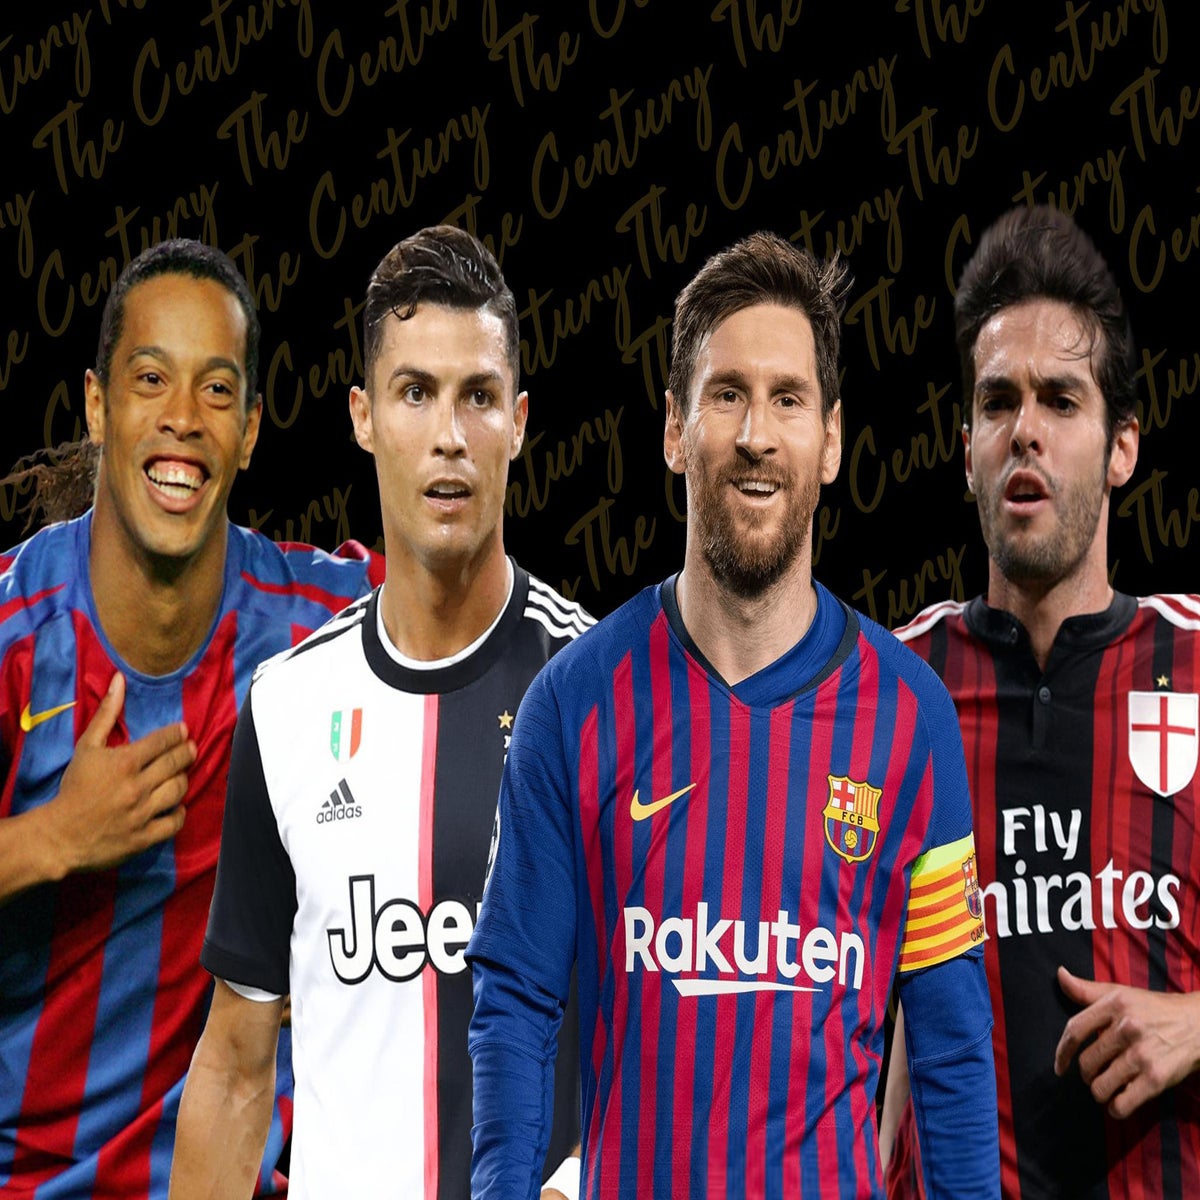 The 100 best football players in the world